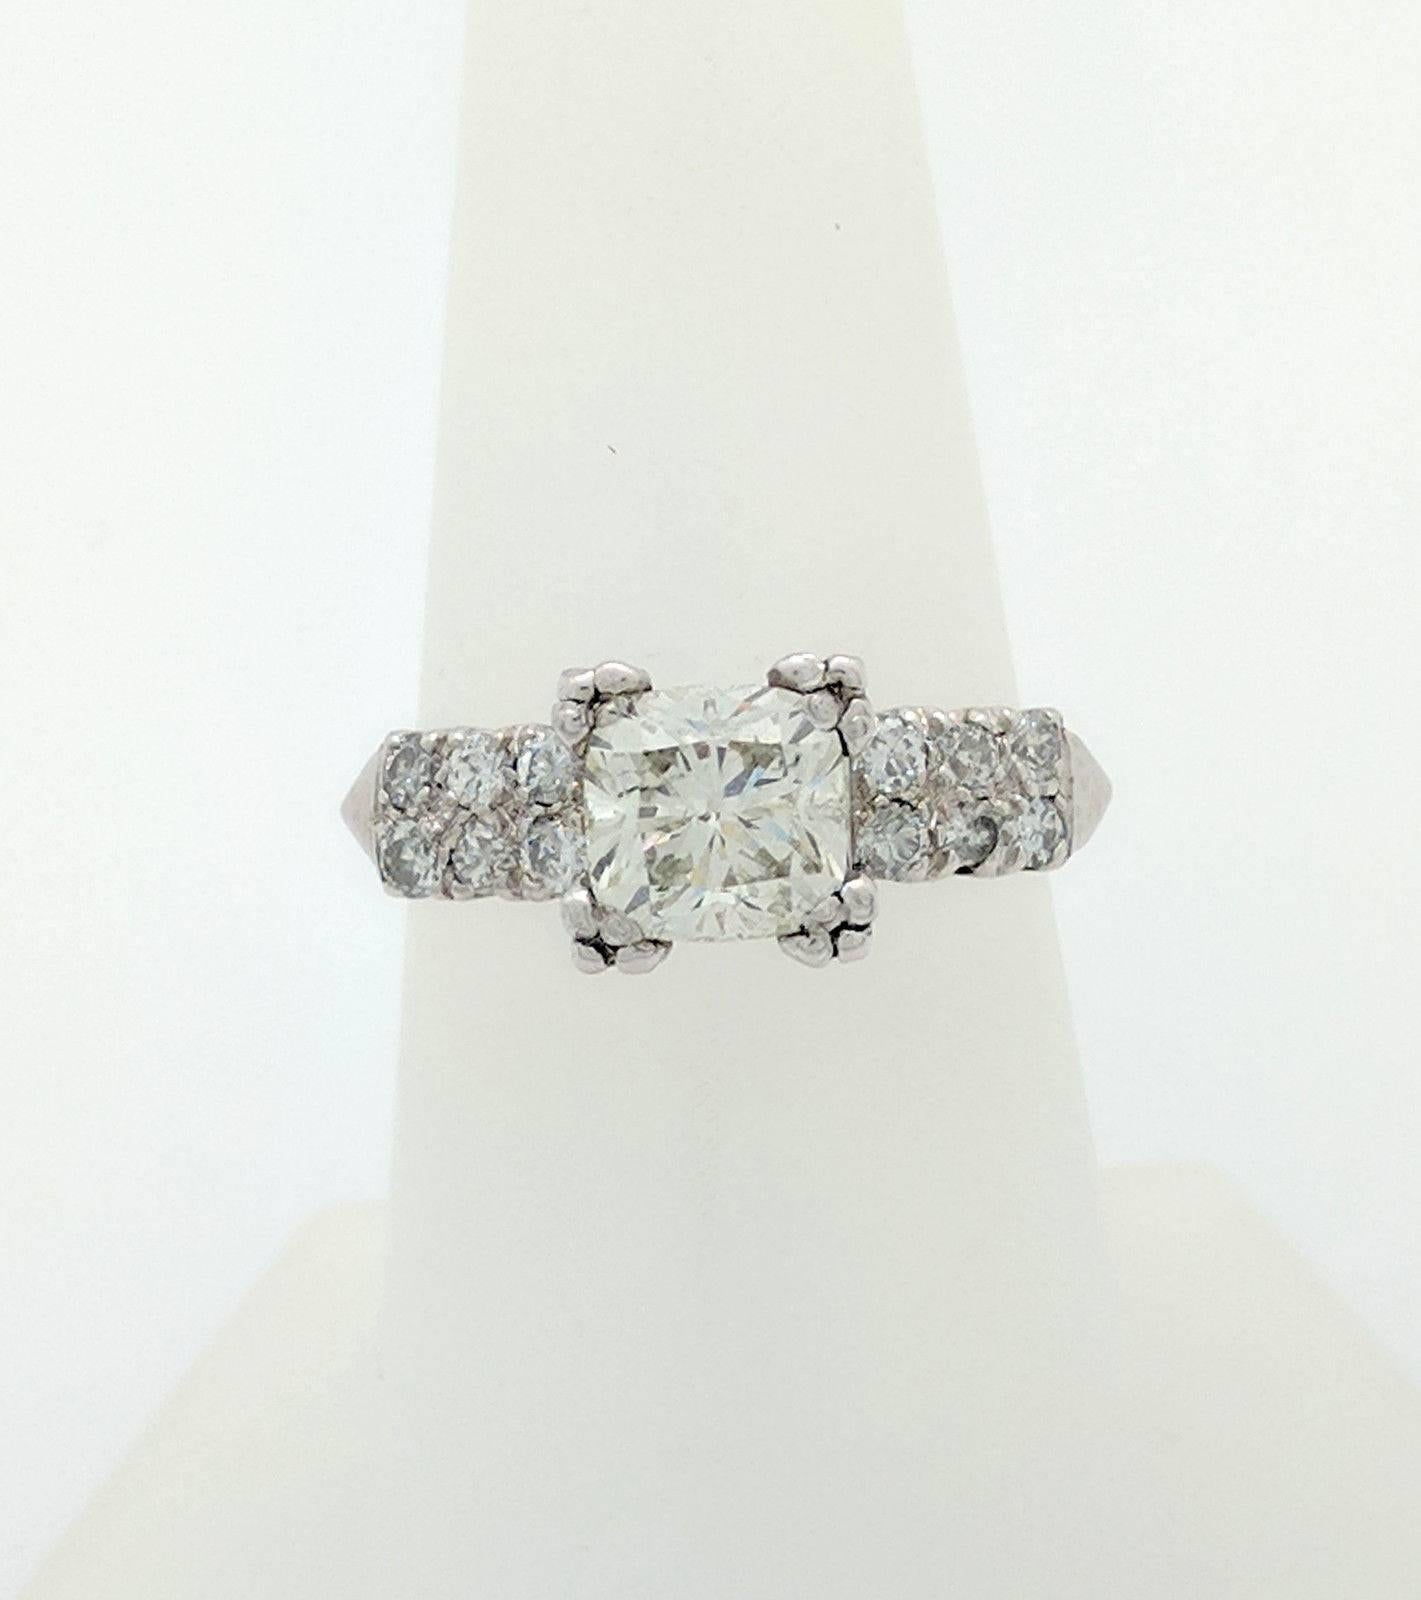 Platinum 1.51ct Cushion Cut Diamond Vintage Engagement Ring SI1/I

You are viewing a beautiful 1.51ct natural cushion cut diamond. We estimate this diamond to be SI1 in clarity and I in color. The diamond is beautifully displayed in a vintage